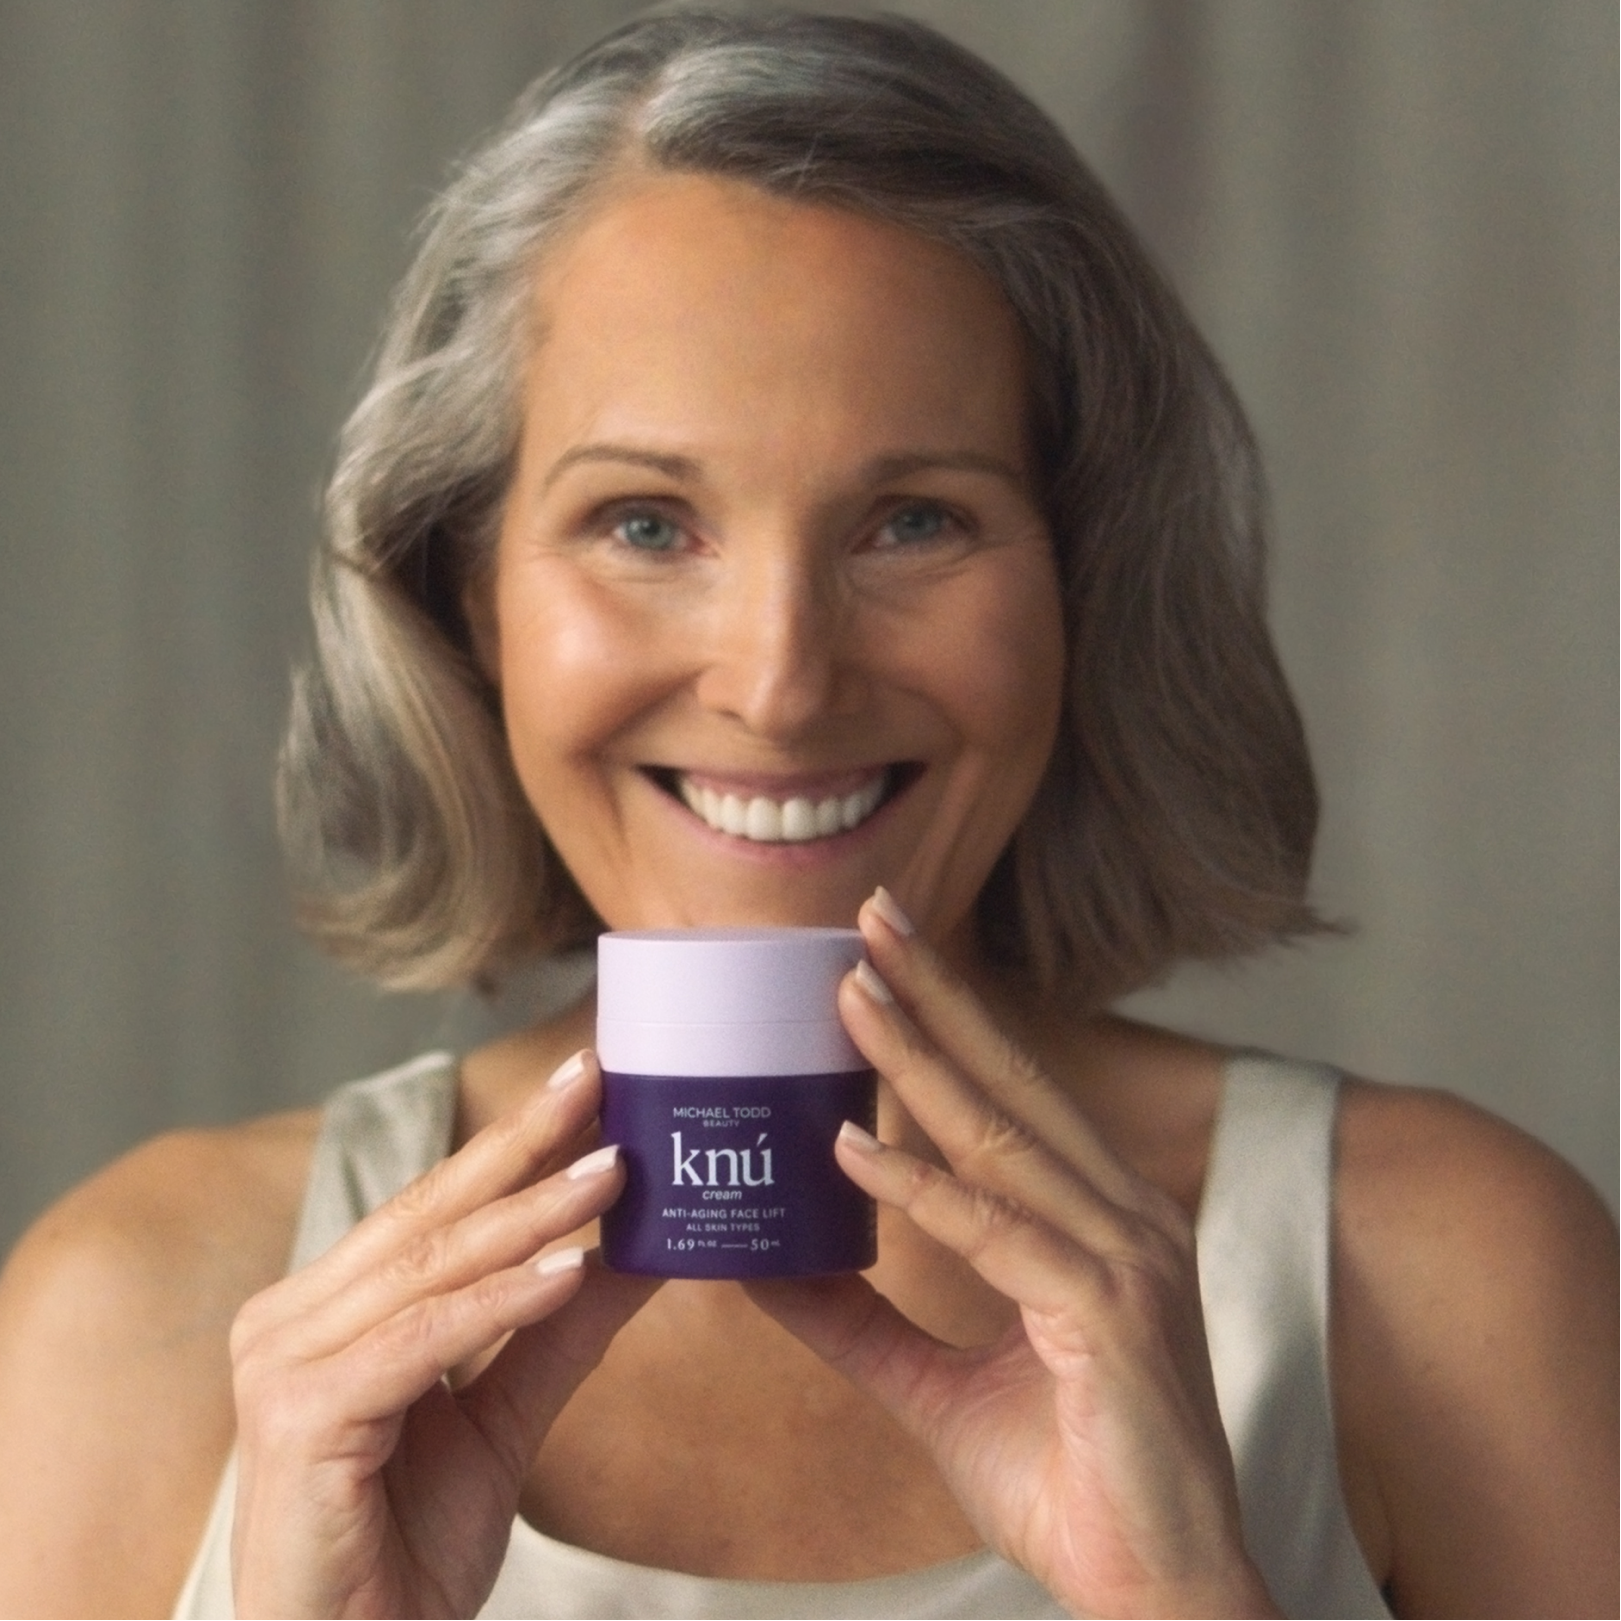 A woman holding up a jar of The Knú Ageless Duo serum for firmness by Michael Todd Beauty.